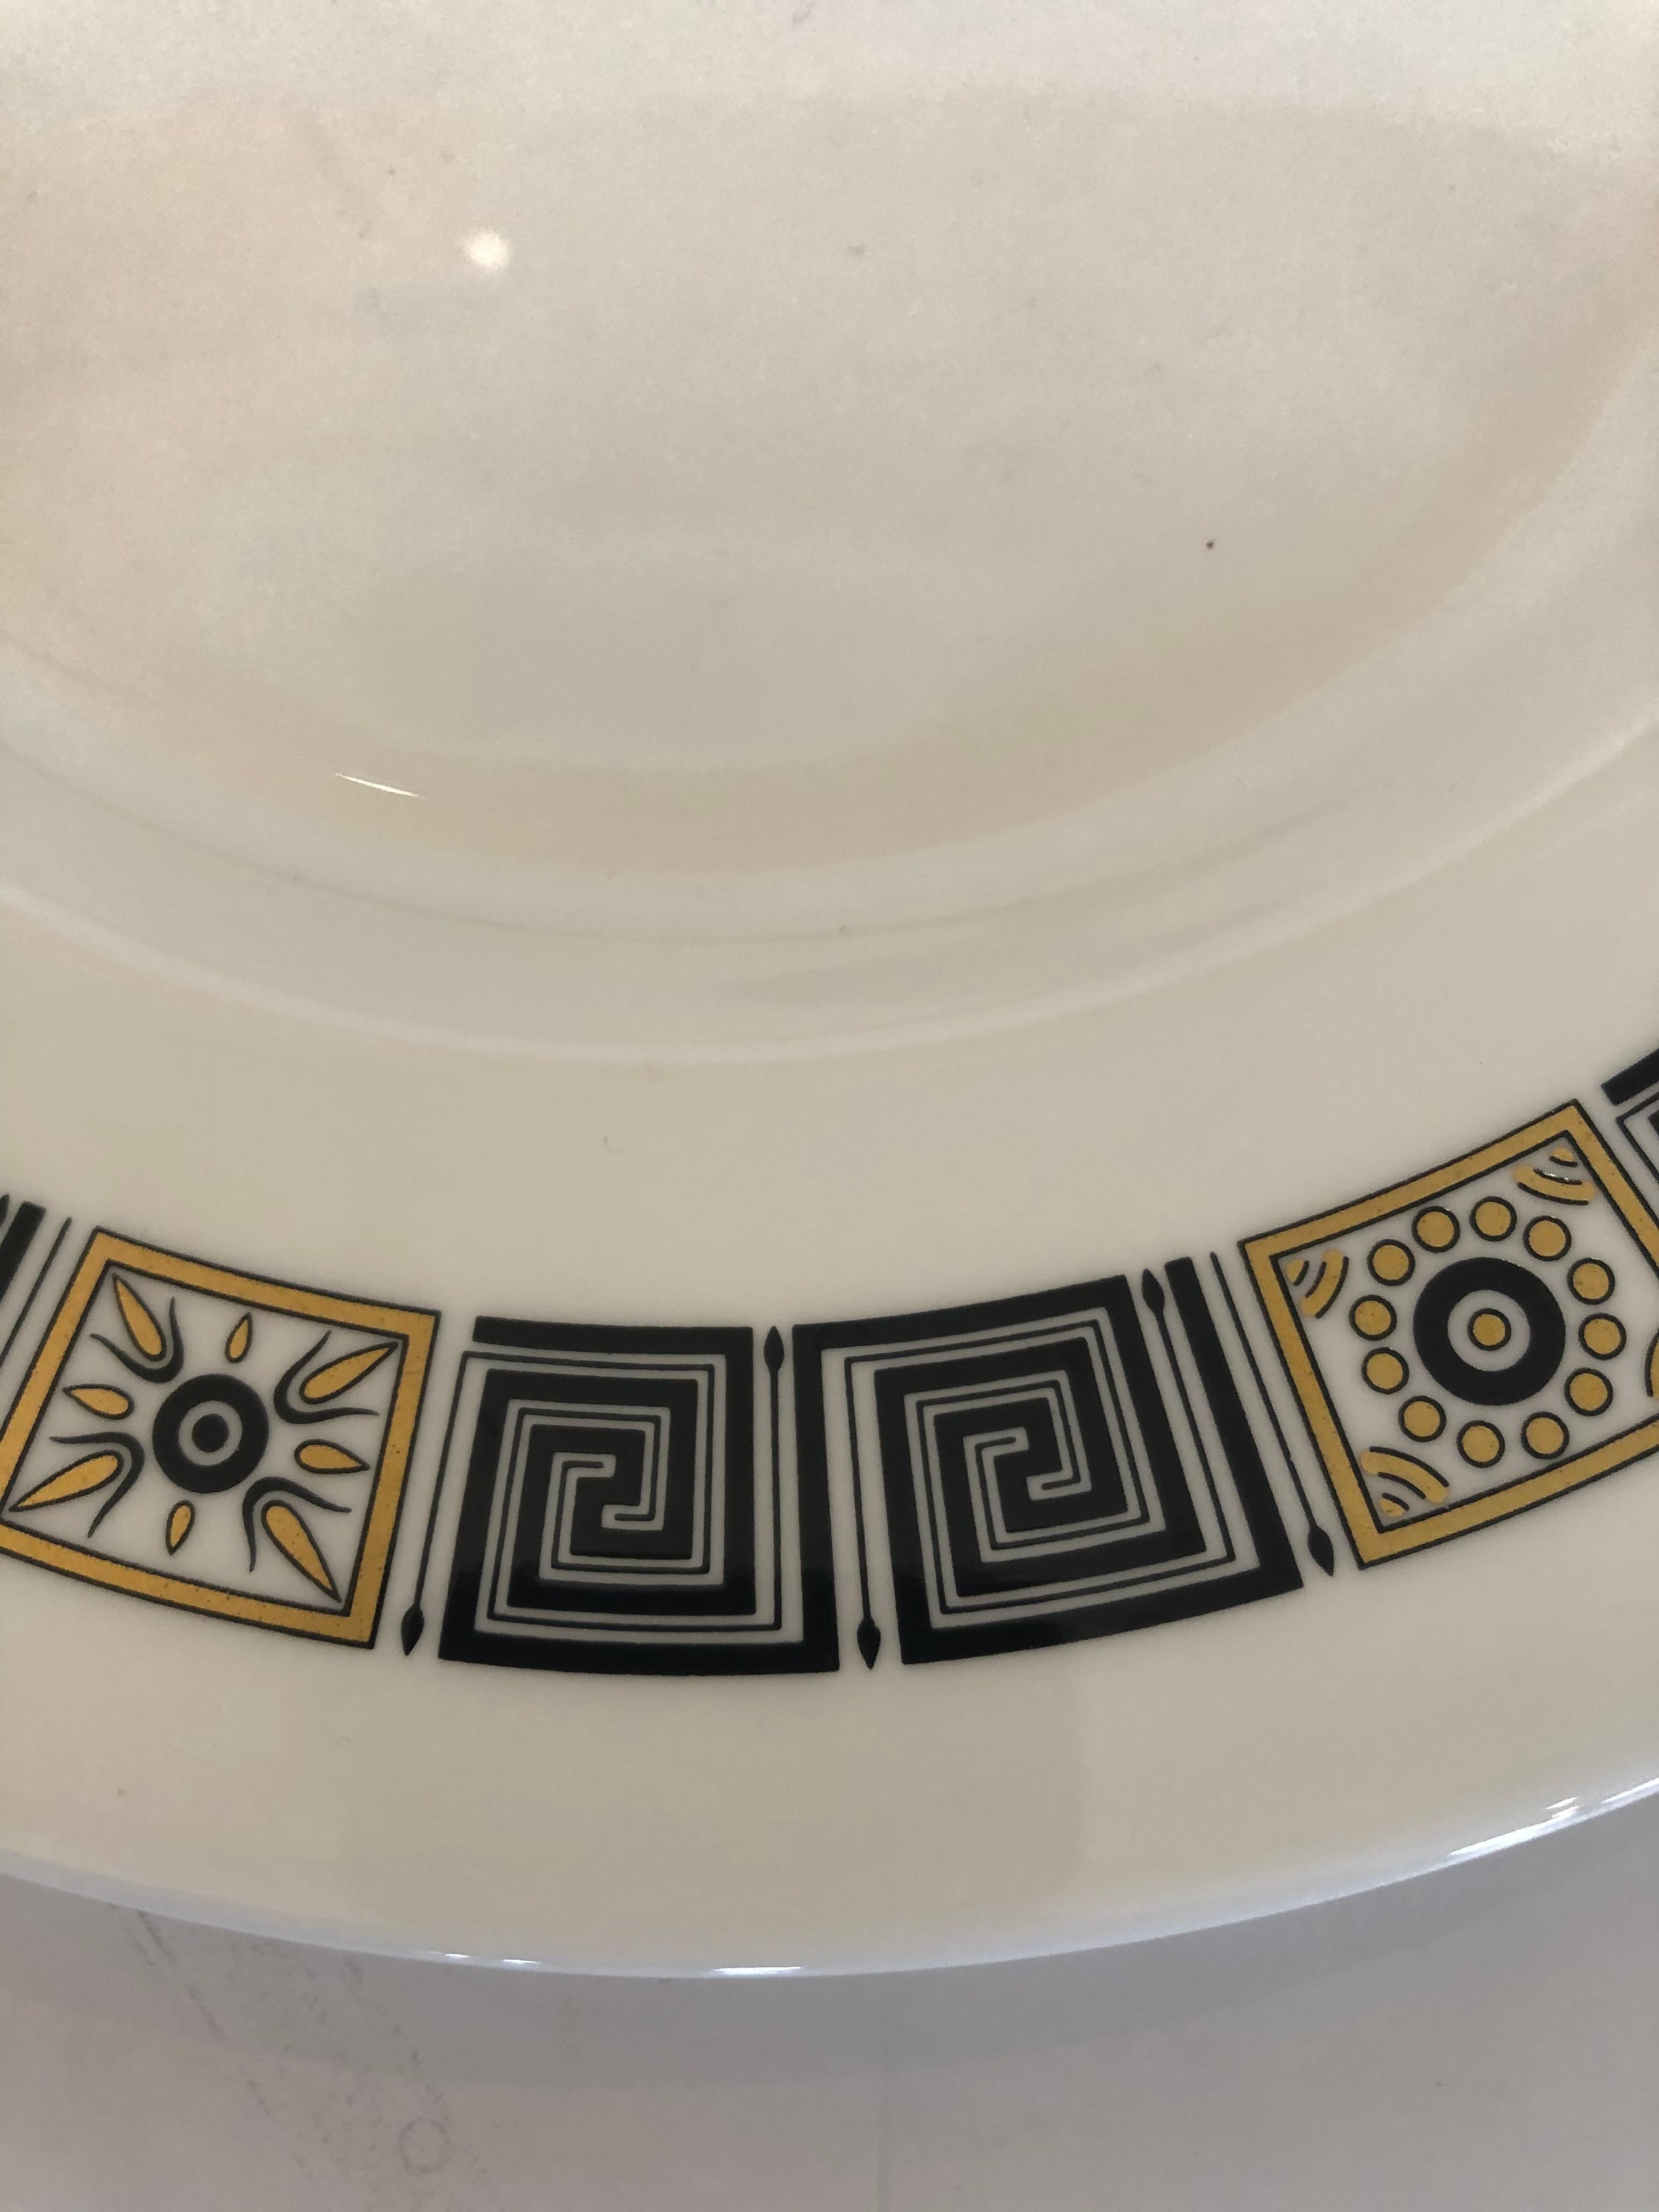 A delicious set of 12 Wedgewood dinner service plates having black and gold border with fabulous Greek key motife.